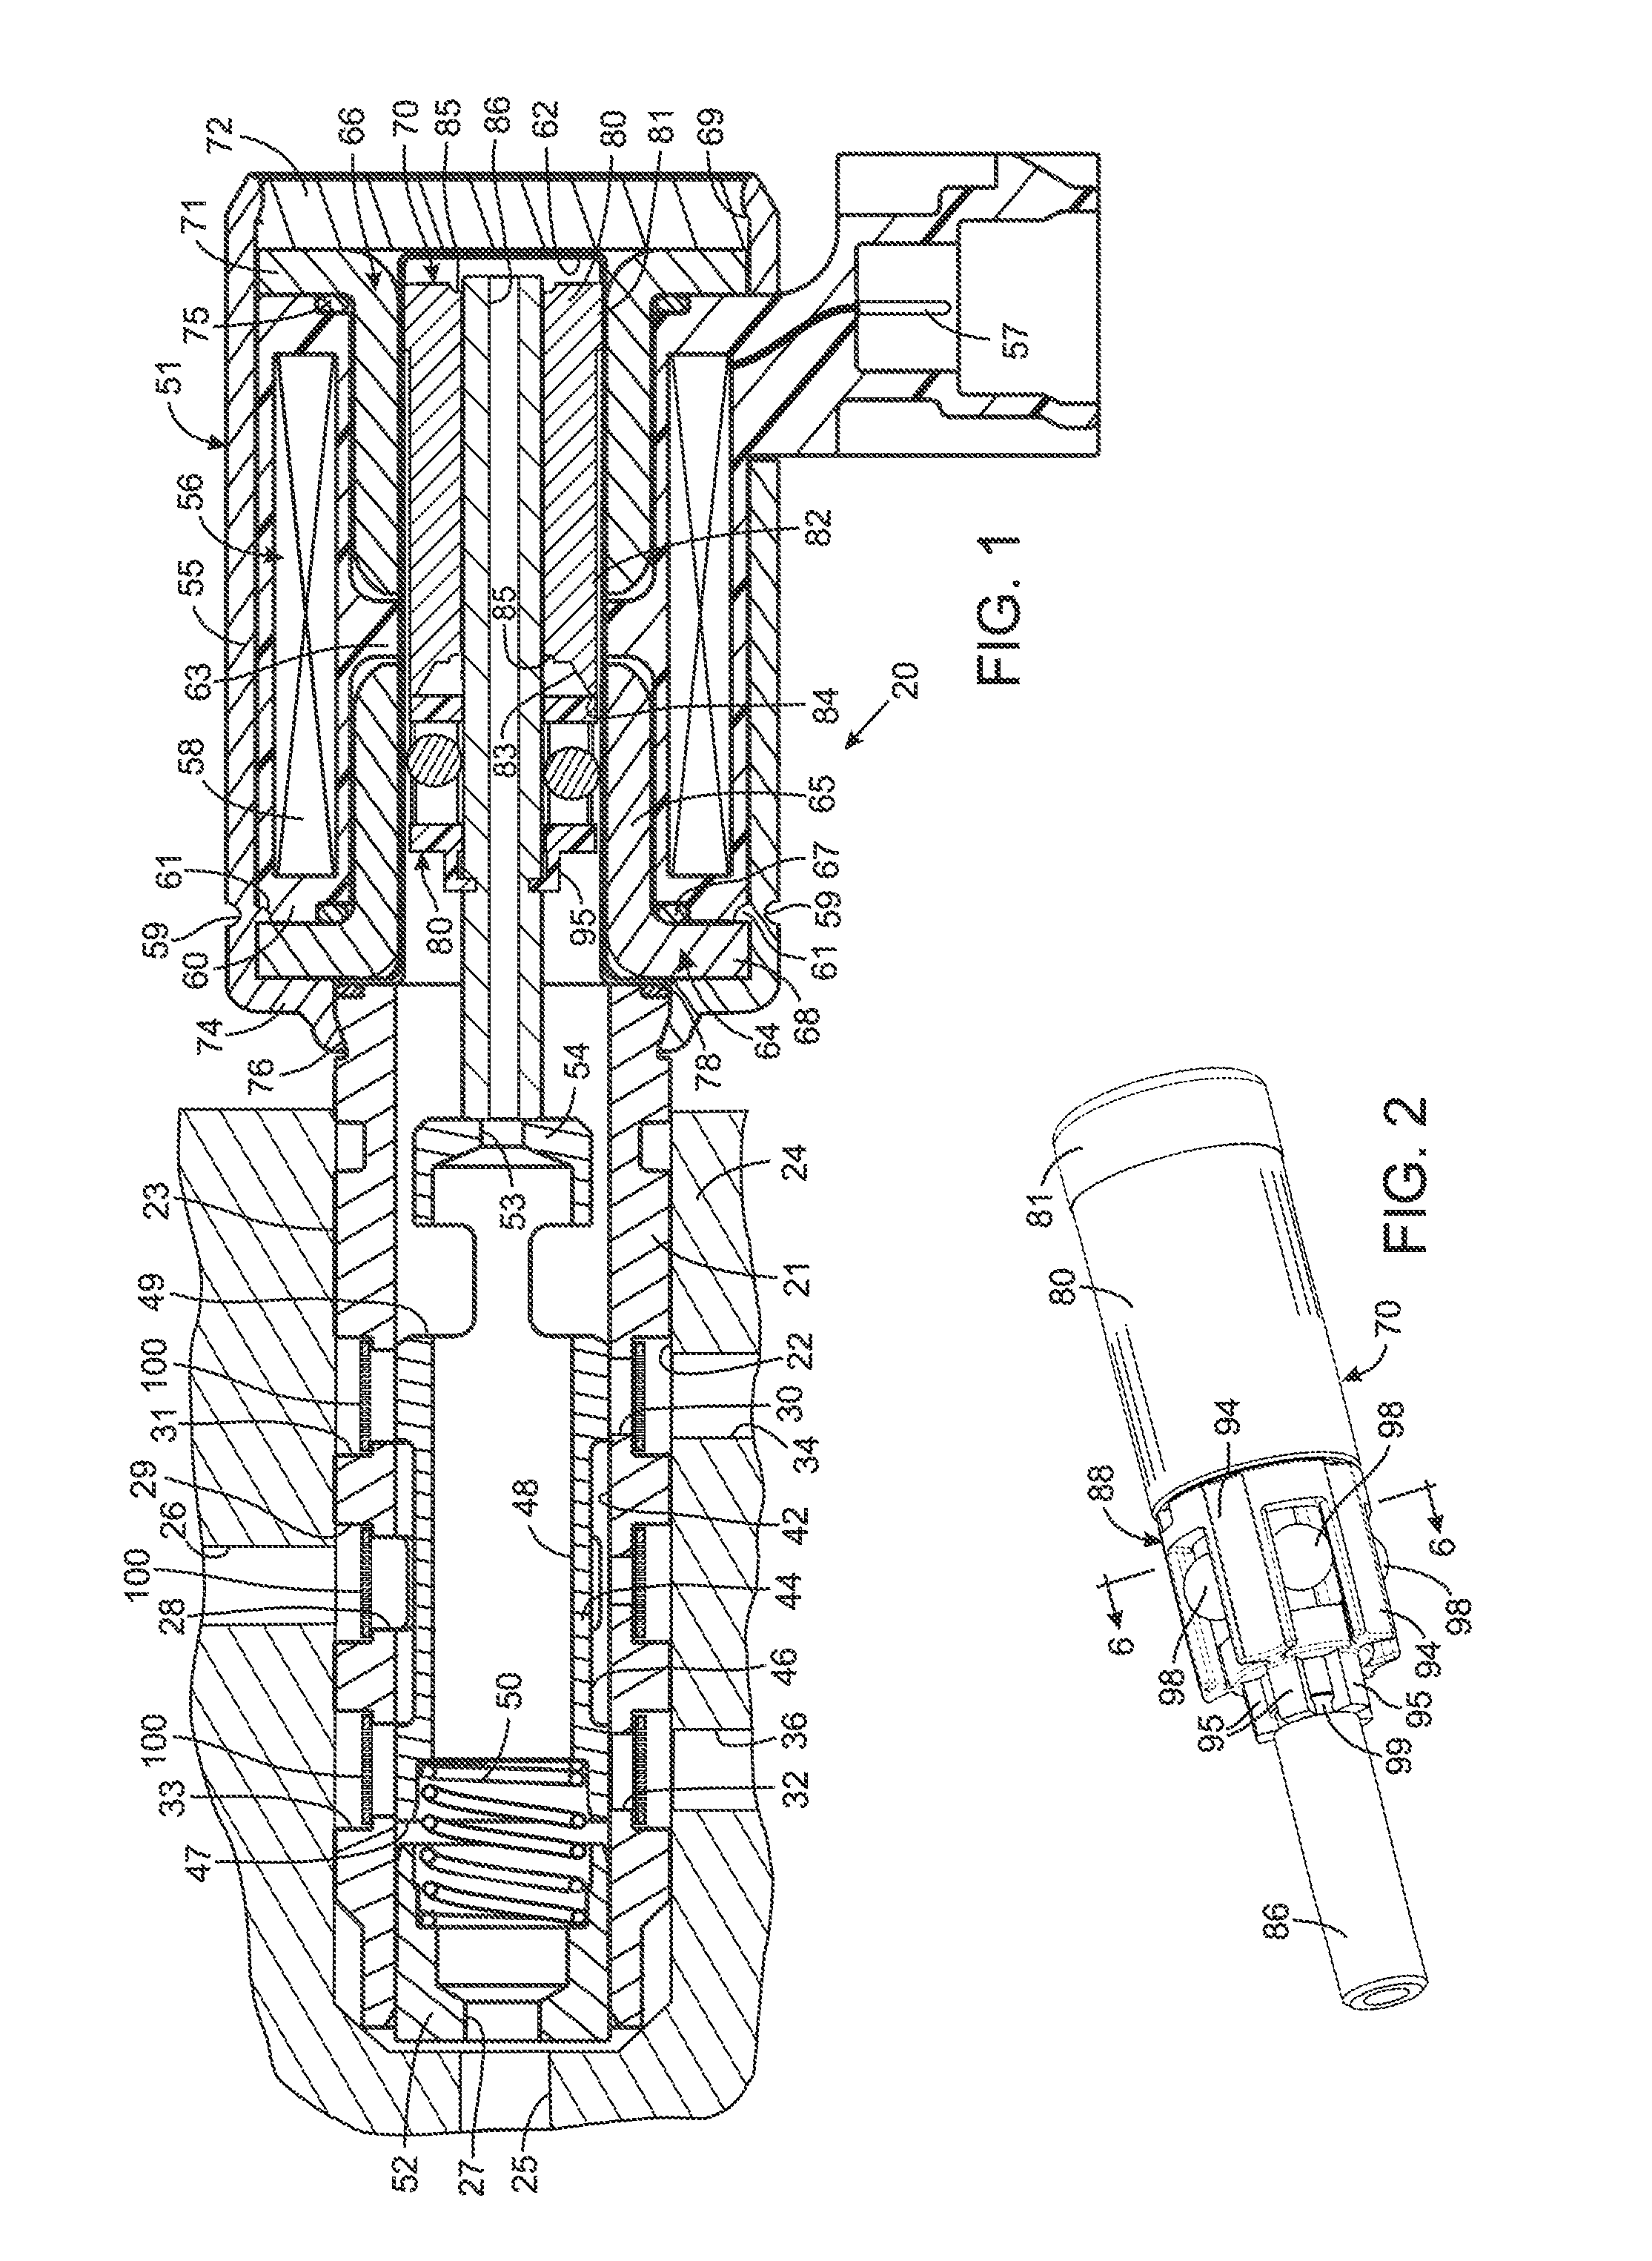 Filter band for an electrohydraulic valve